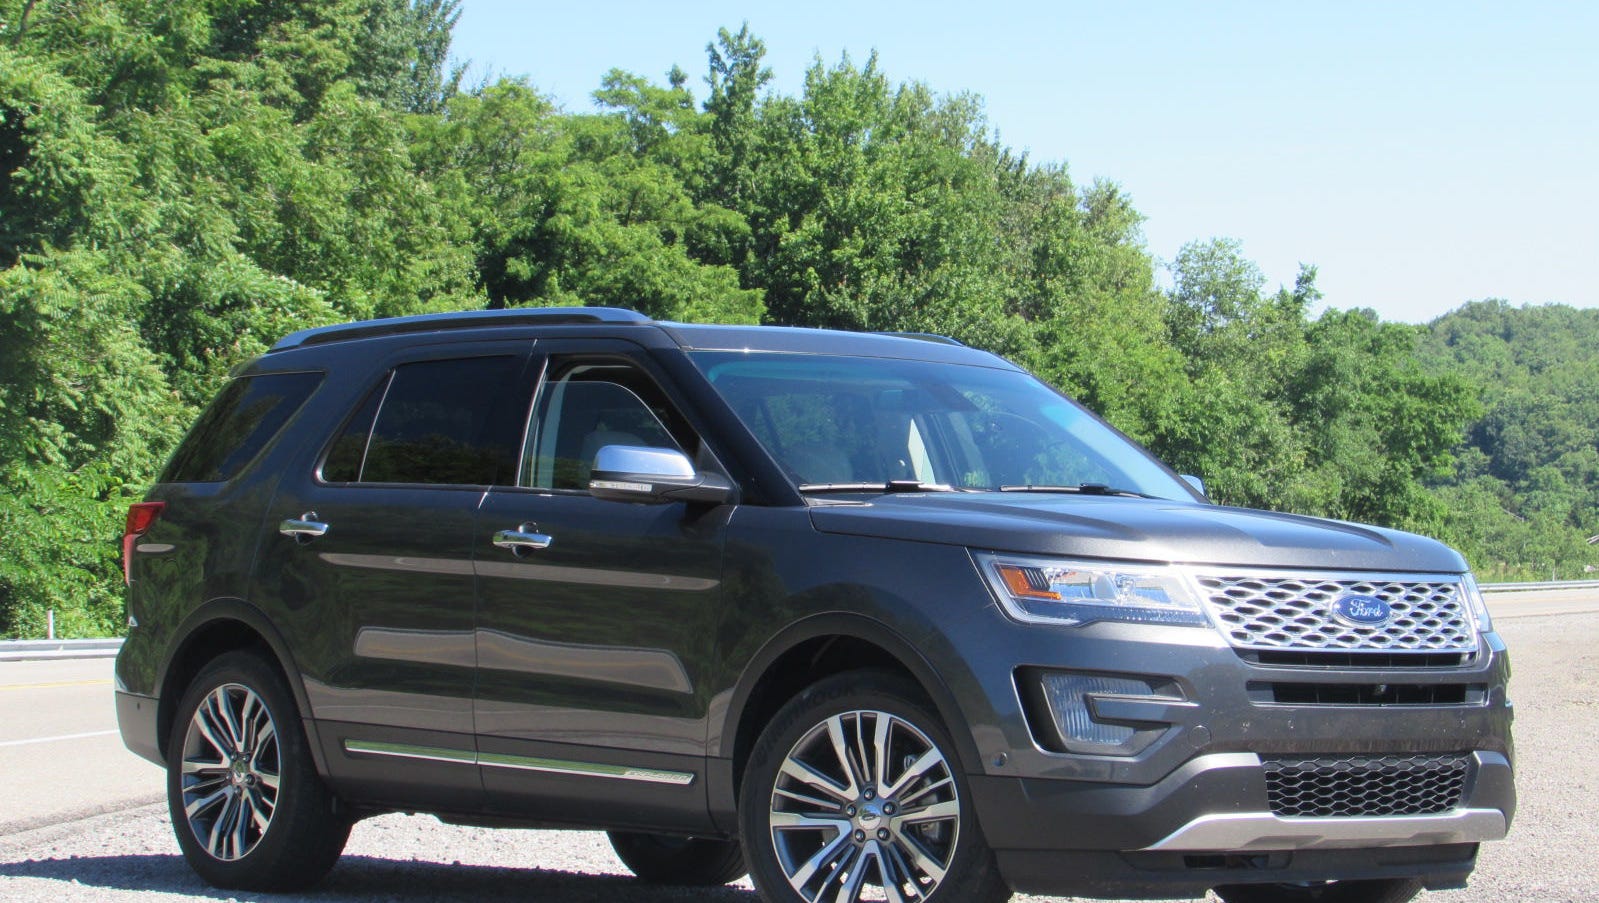 Ford Explorer Platinum is refined and sophisticated